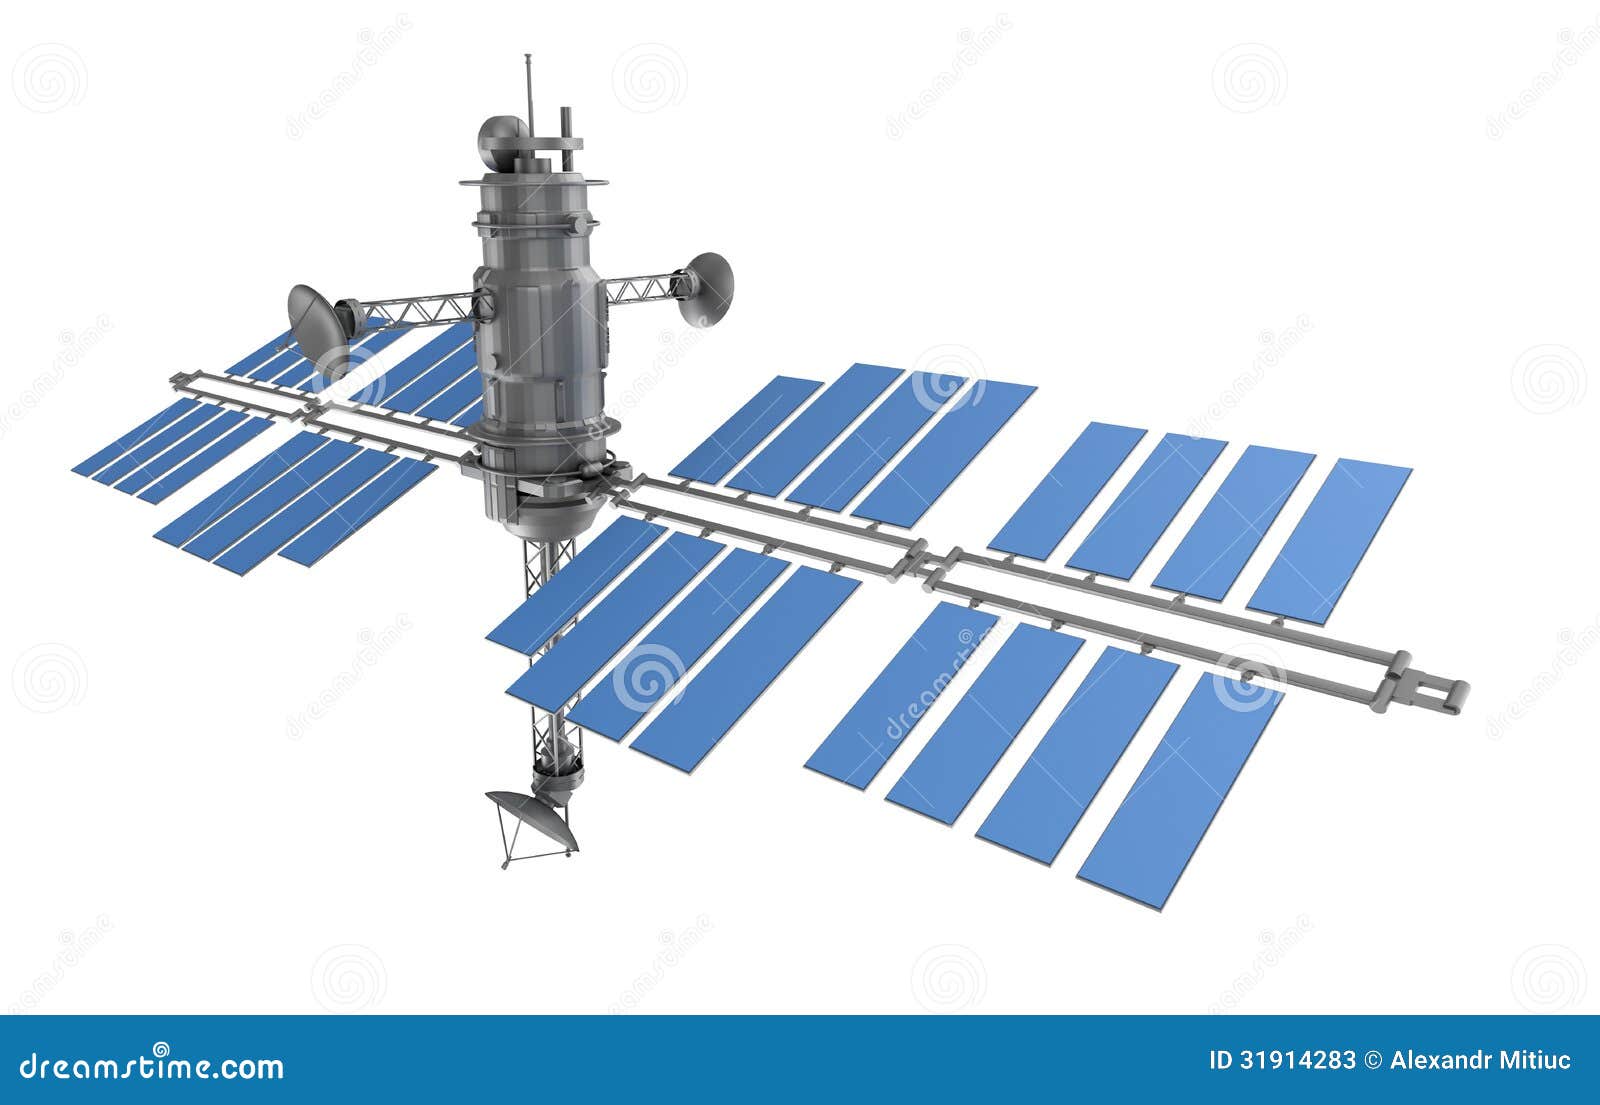 space station clipart - photo #17